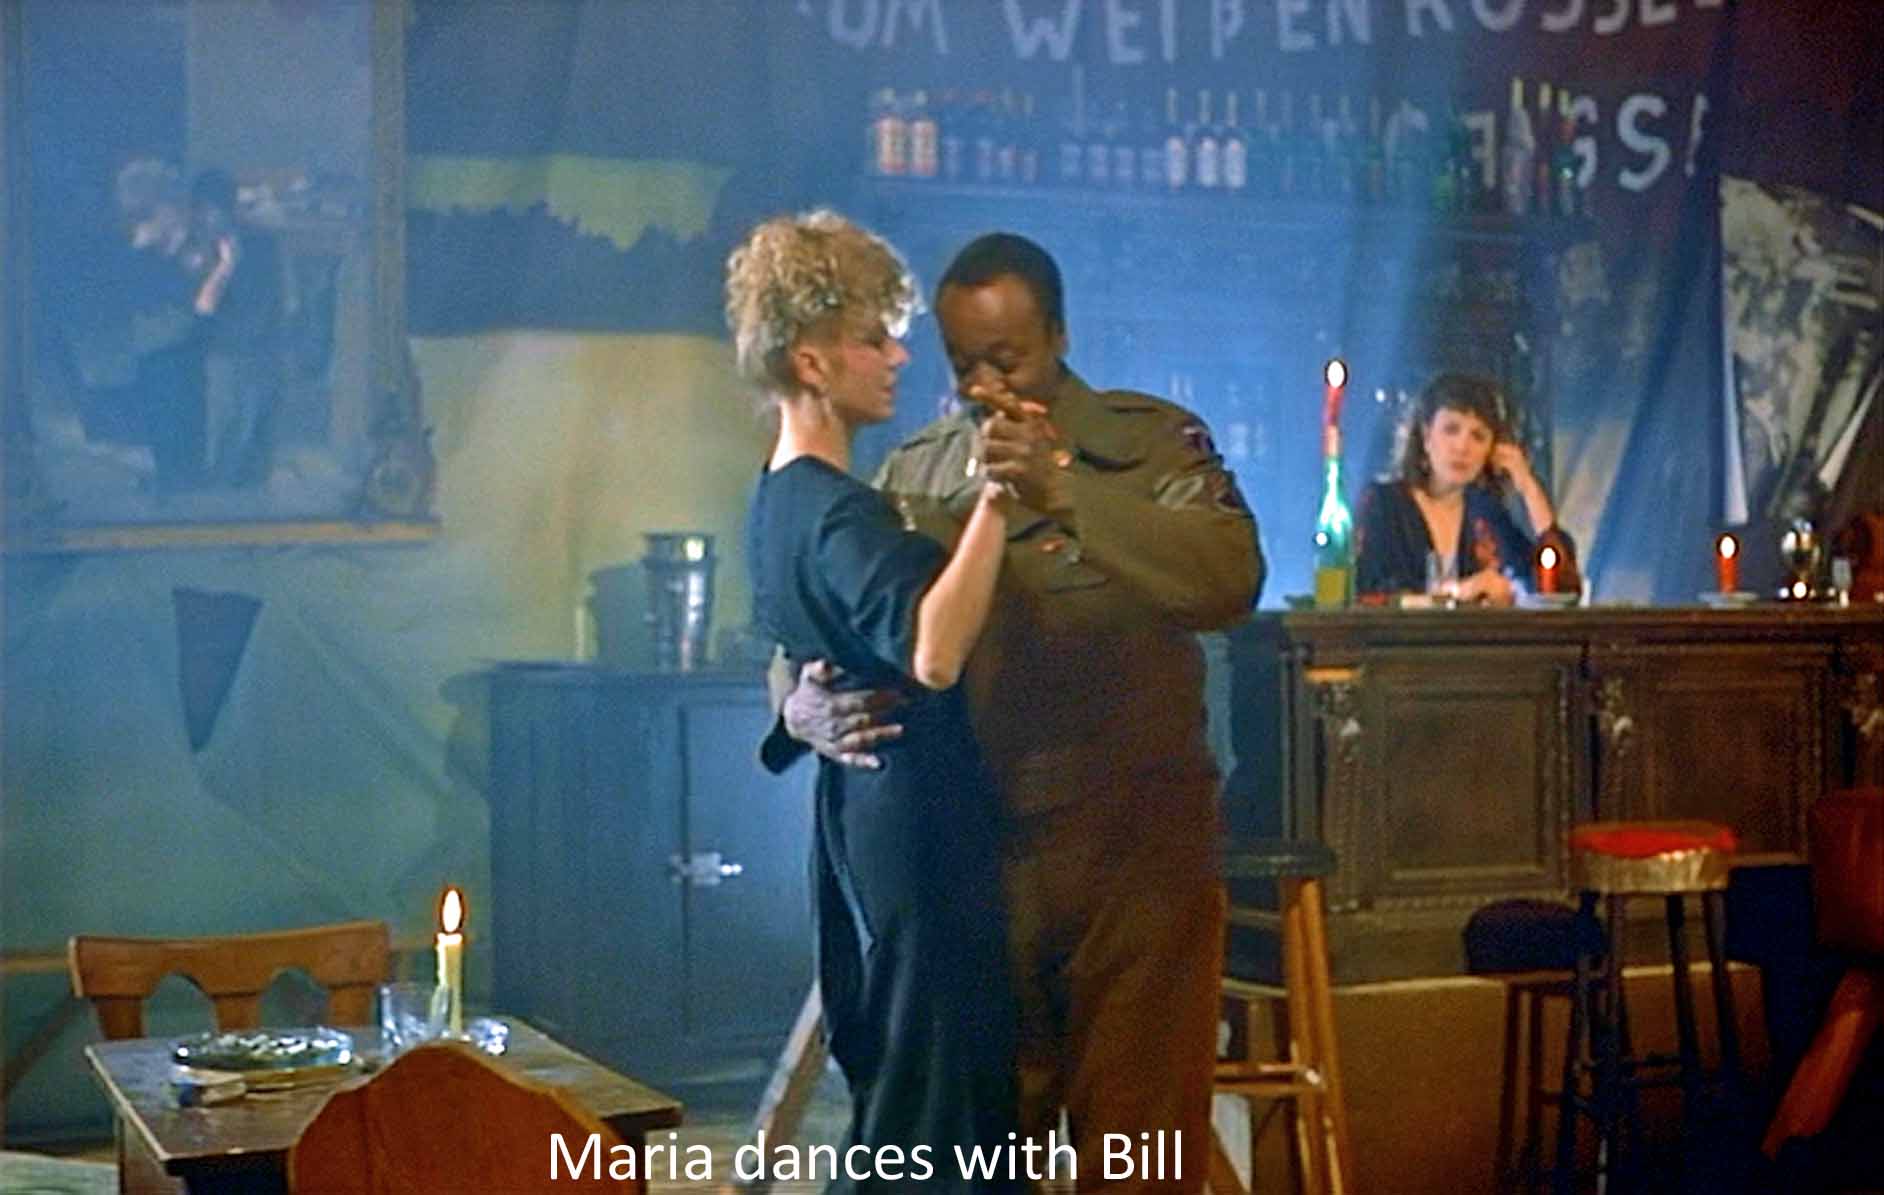 Maria dances with Bill